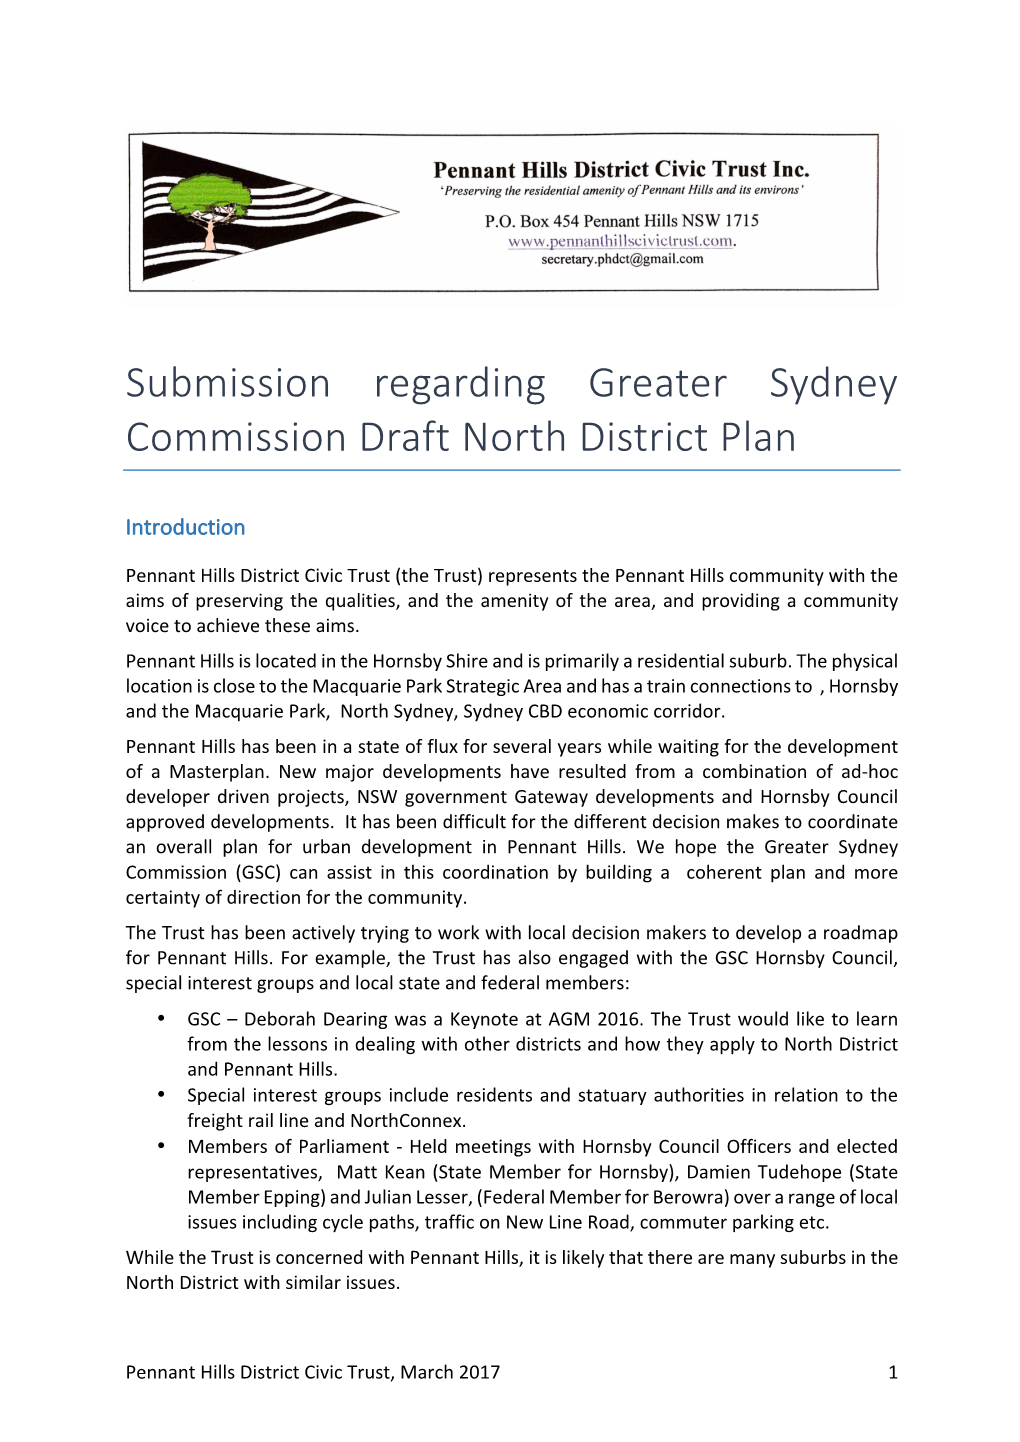 Submission Regarding Greater Sydney Commission Draft North District Plan